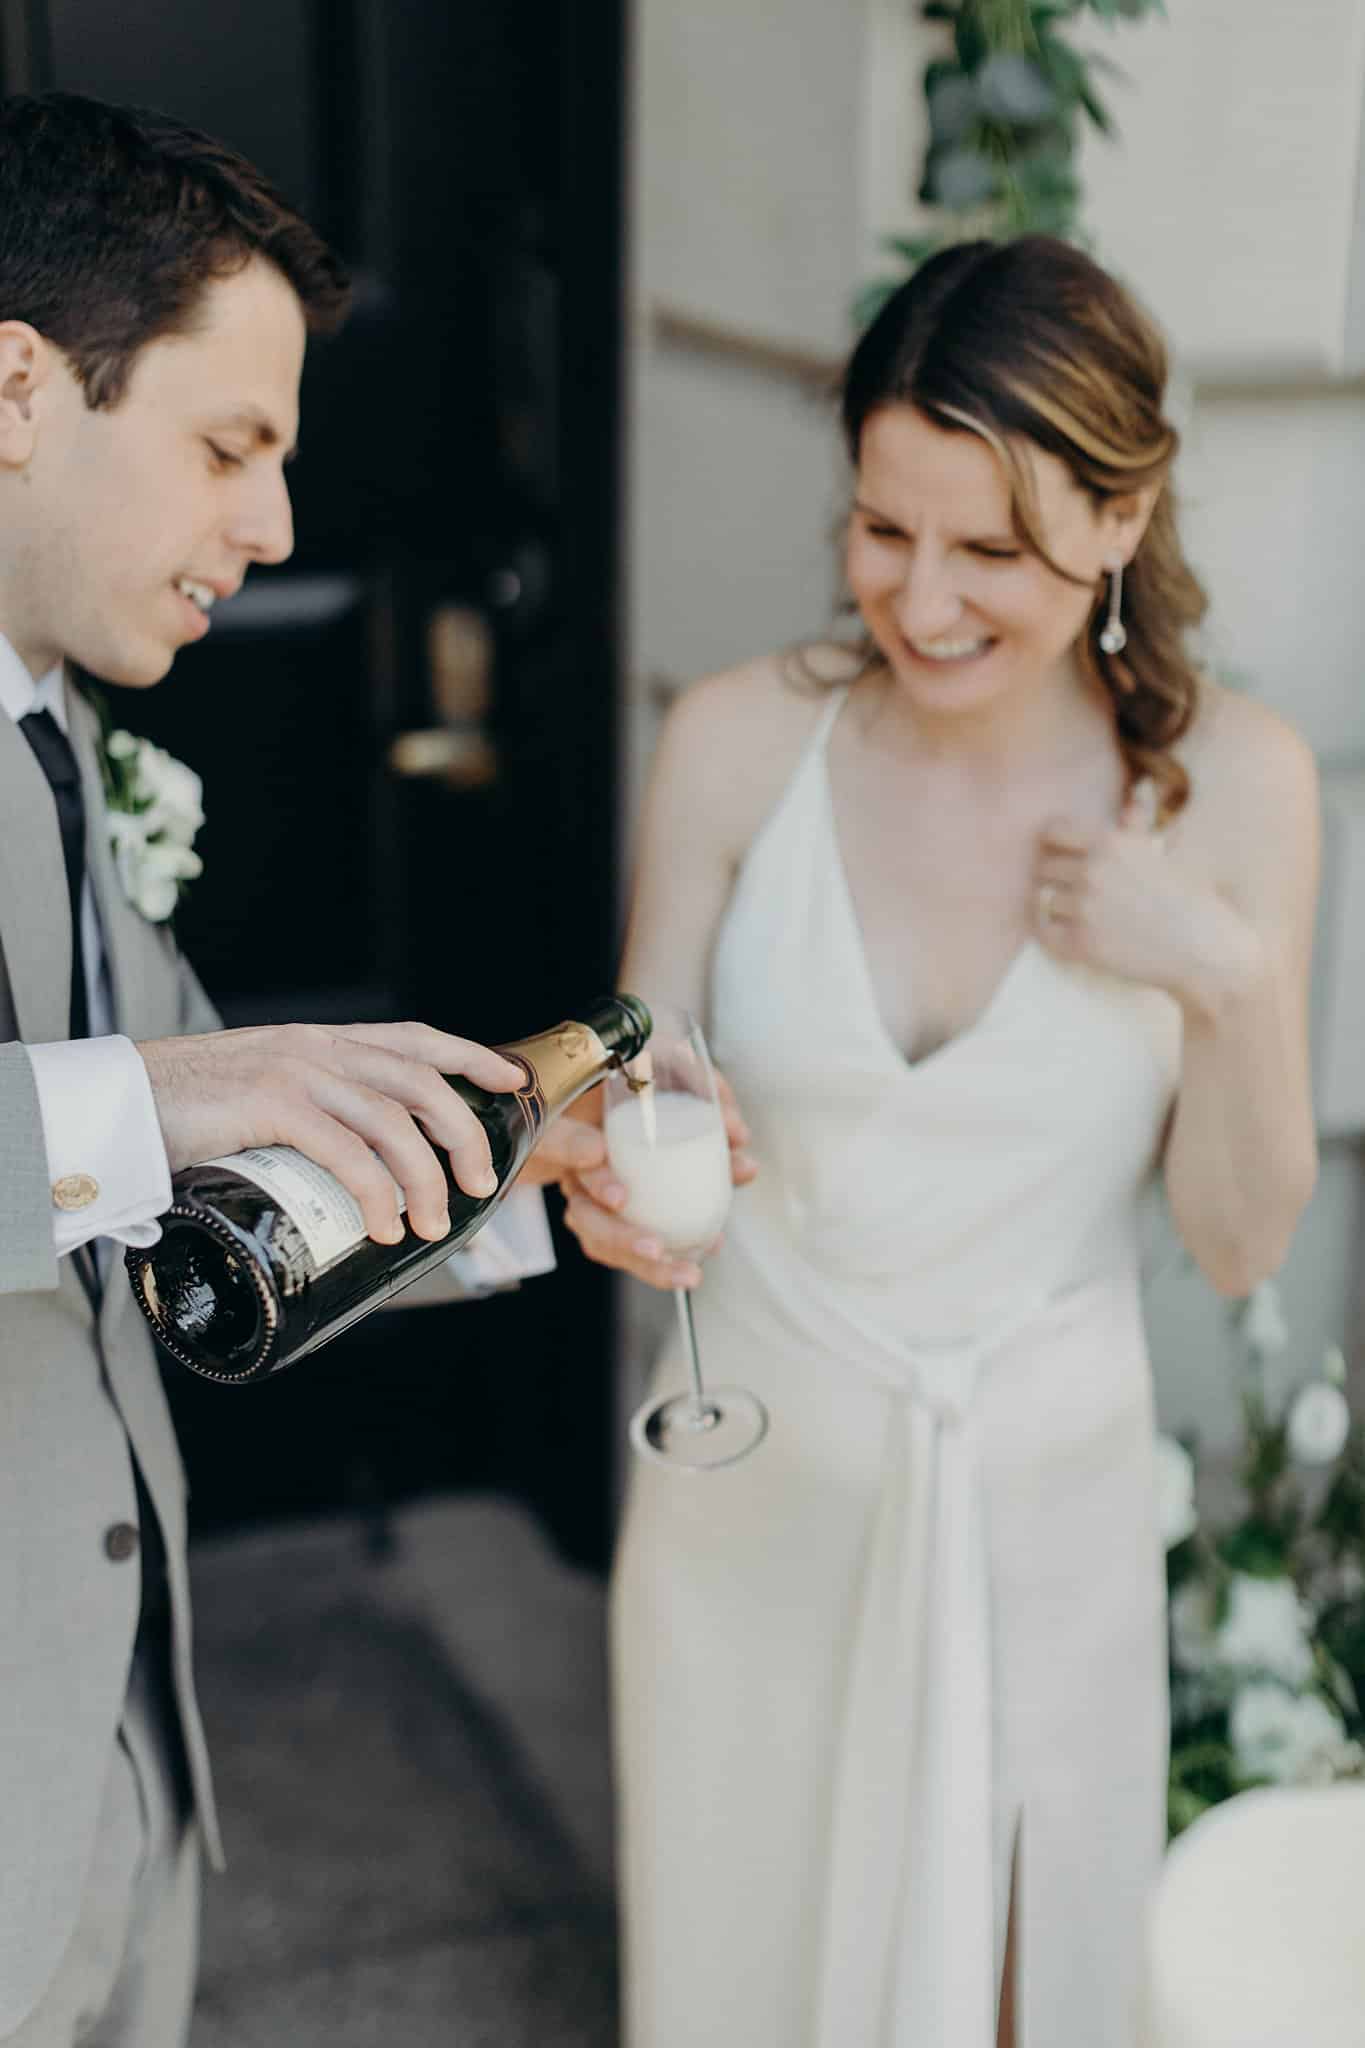 Couple Has Champagne After Eloping in Washington DC